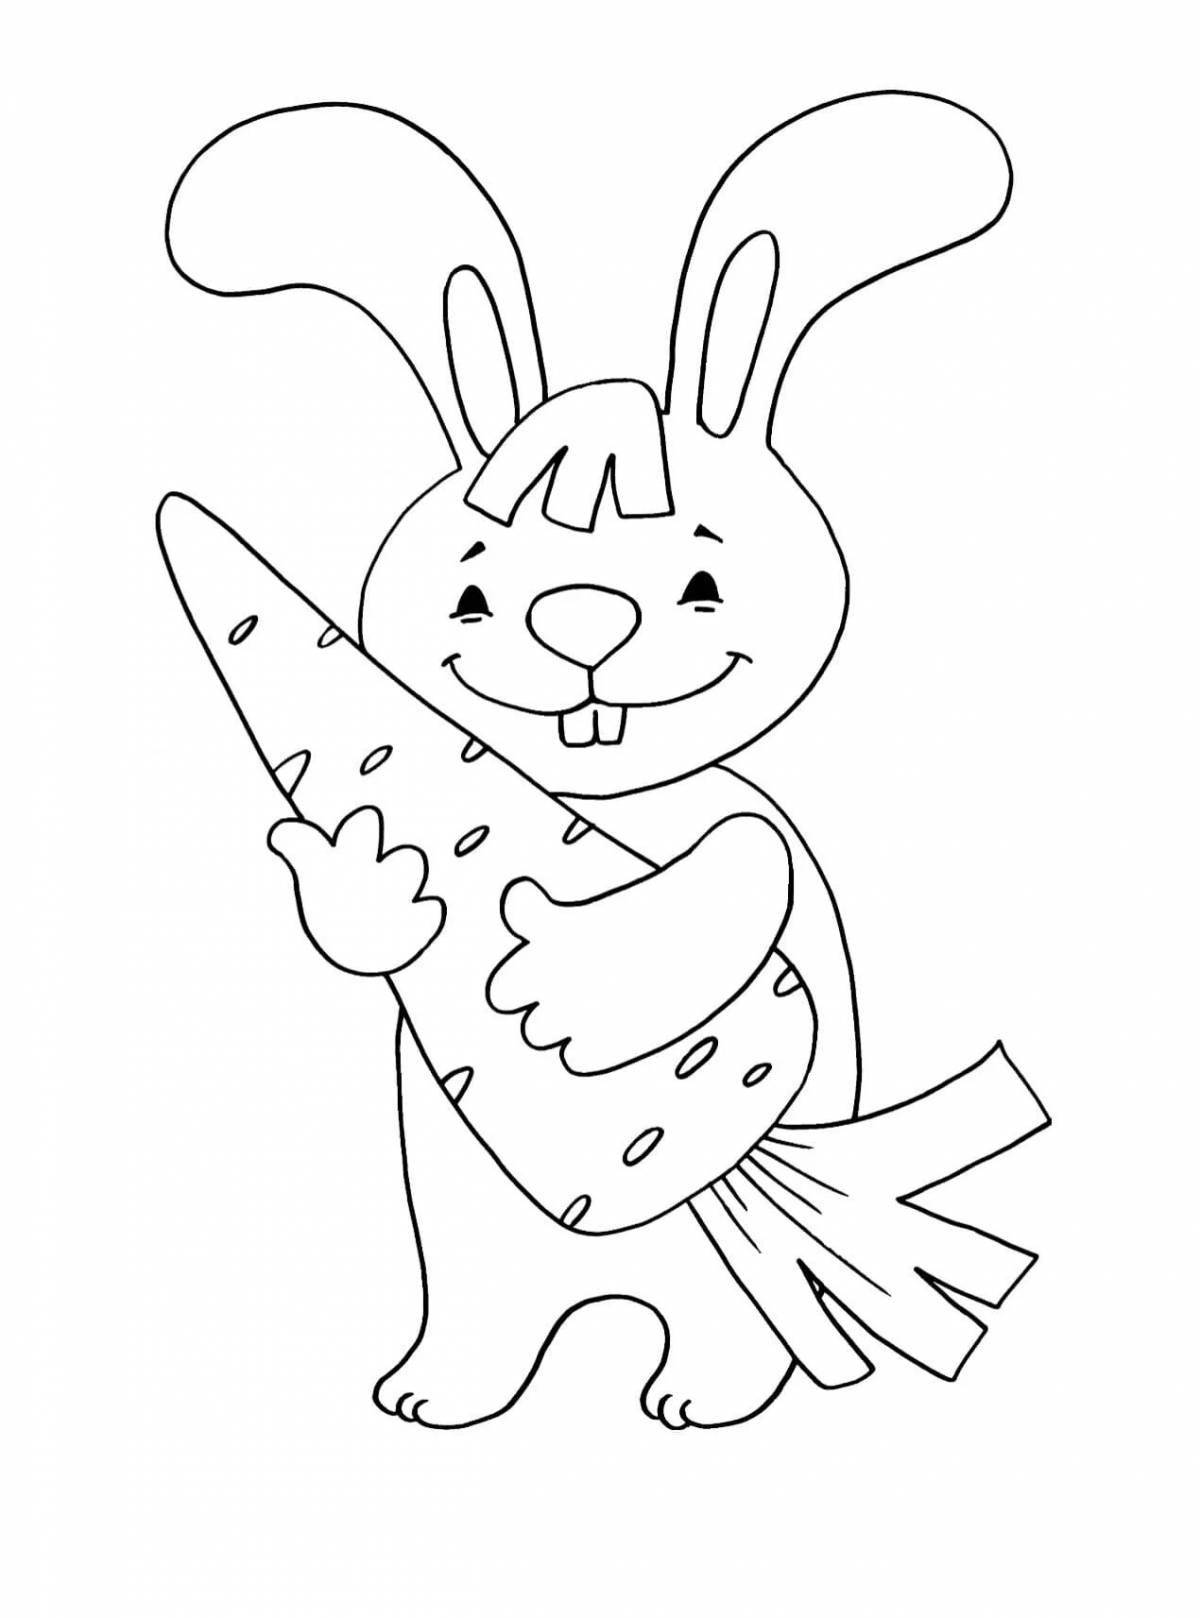 Magic coloring rabbit with a carrot for children